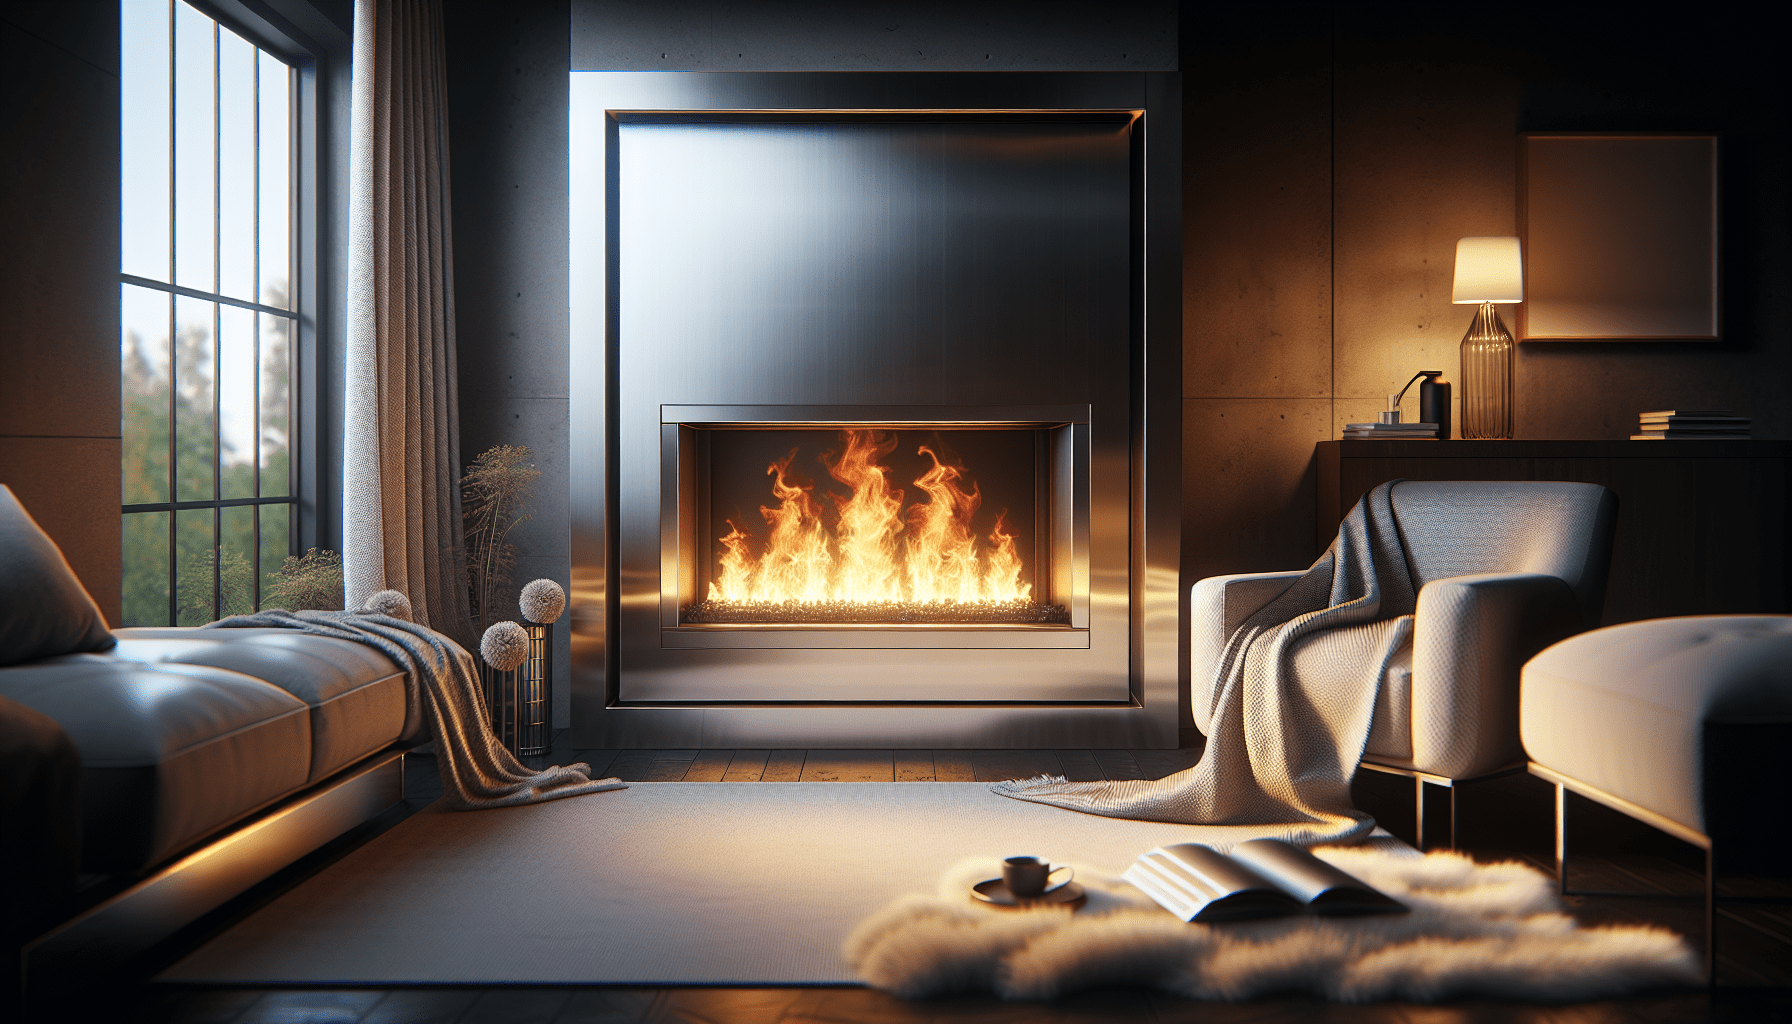 Can You Put Stainless Steel On A Fireplace?